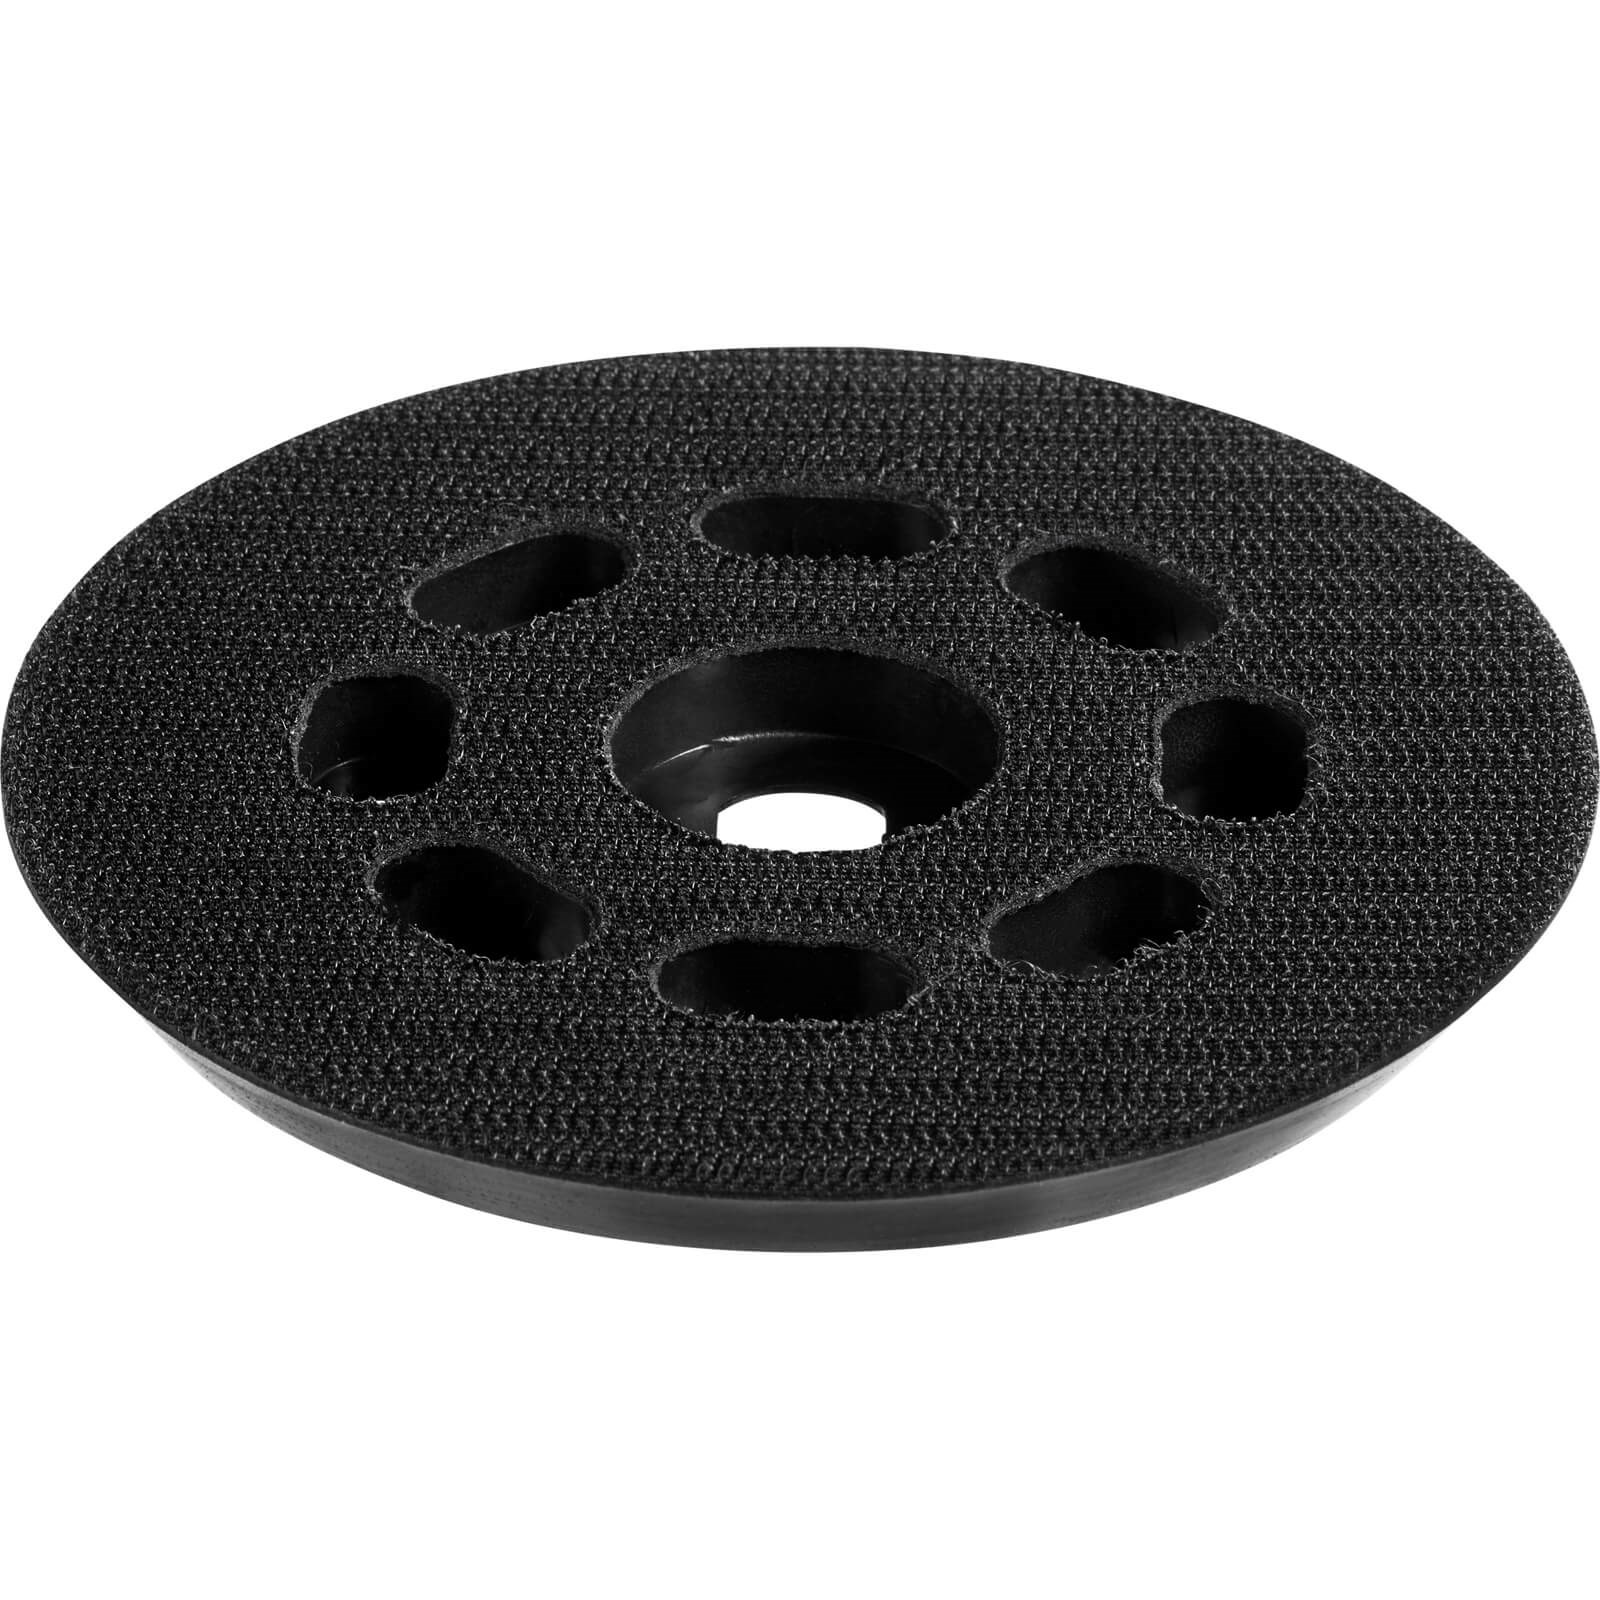 https://www.tooled-up.com/artwork/prodzoom/STA32312-Stanley-Replacement-Backing-Pad-for-Black-and-Decker-Sanders-125mm.jpg?w=1600&h=1600&404=default